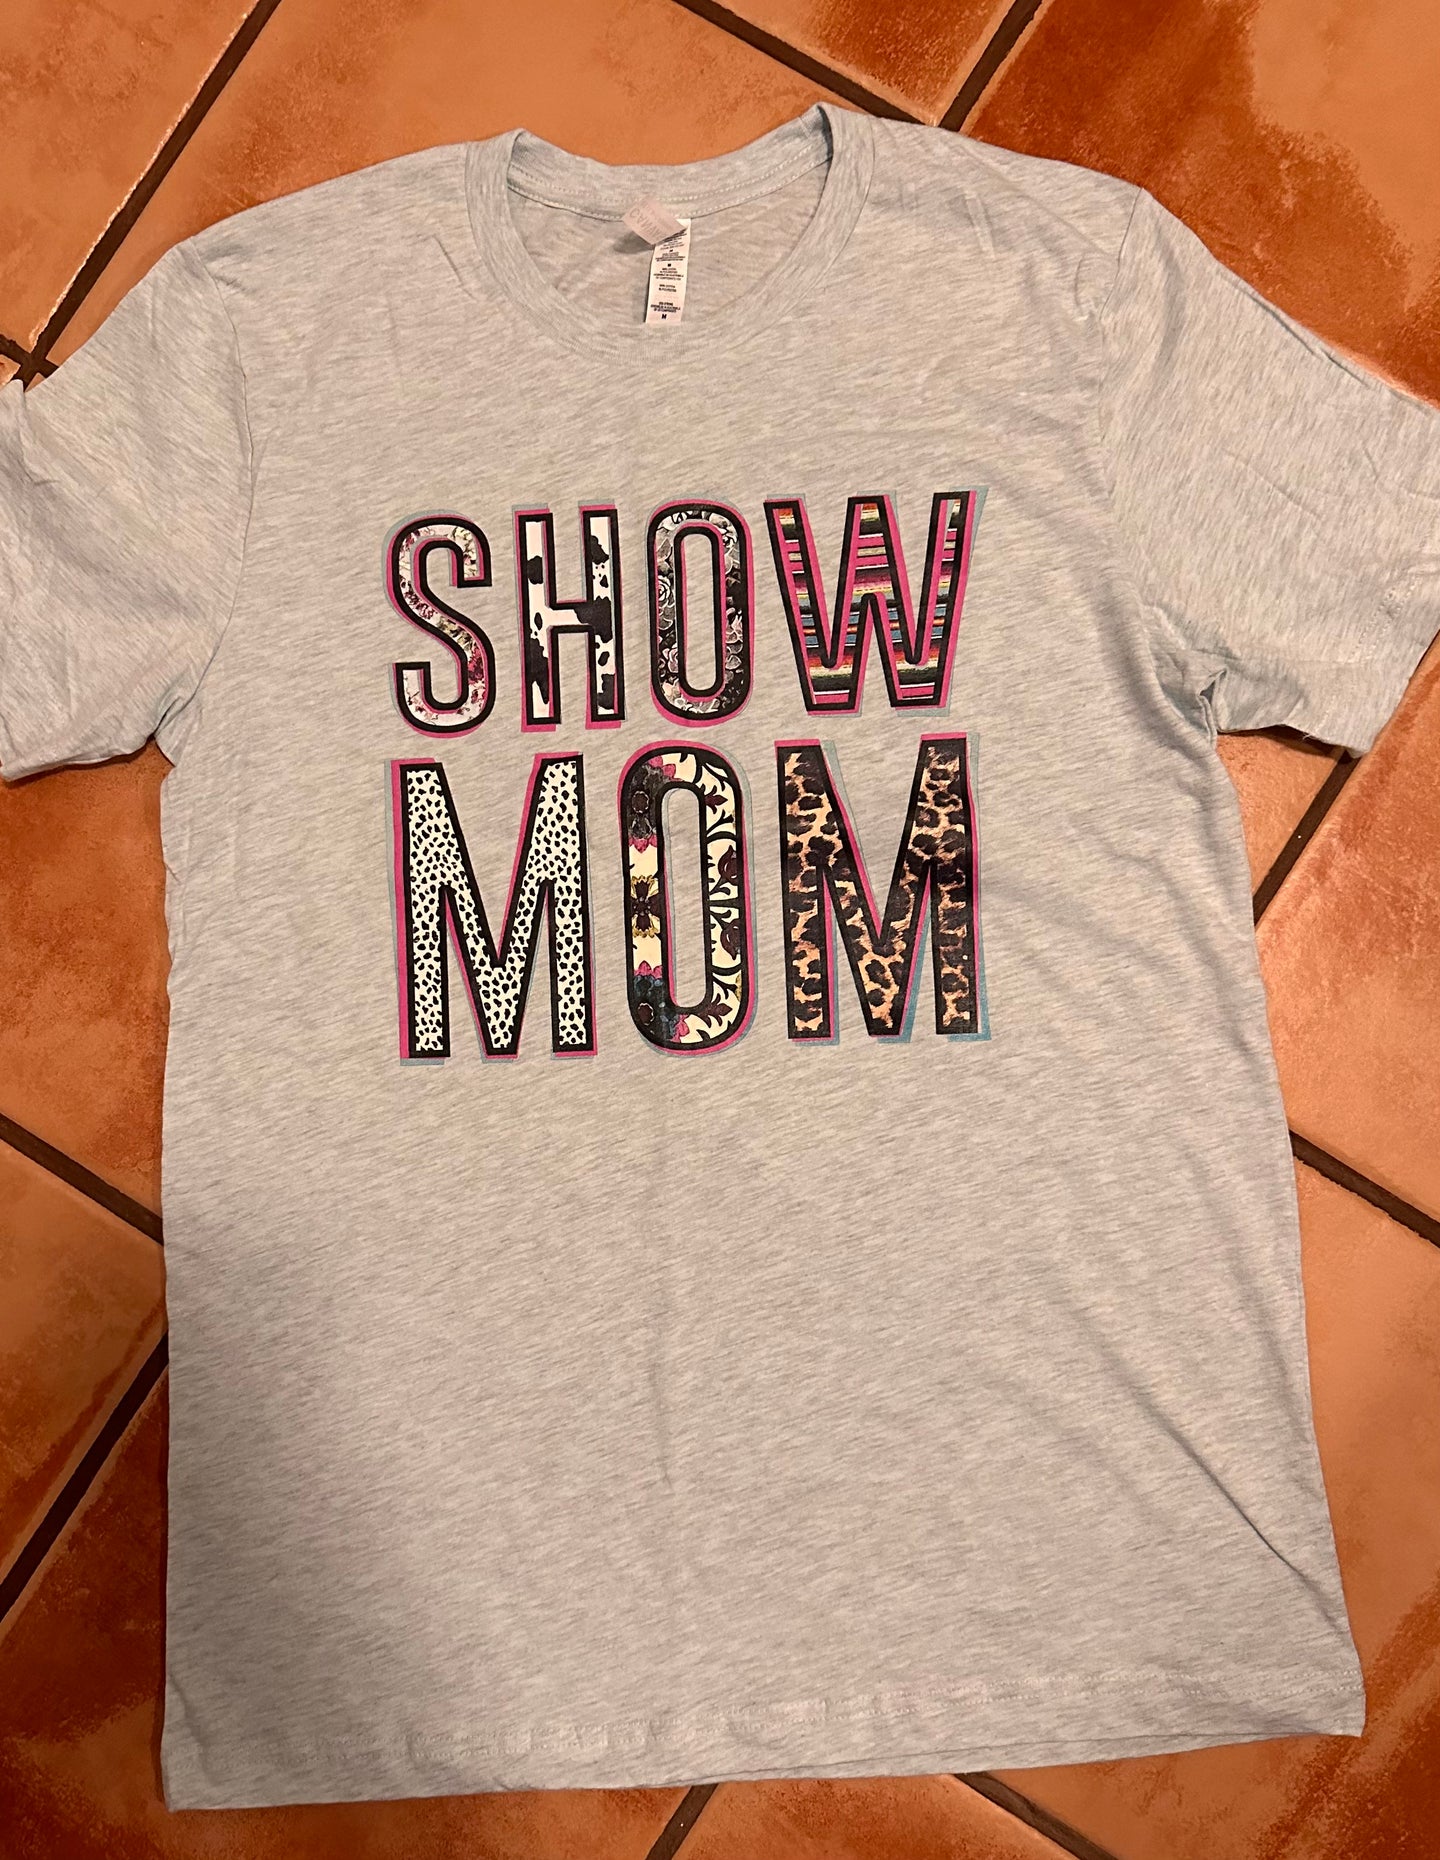 *Pre-Order* Show Mom Tee